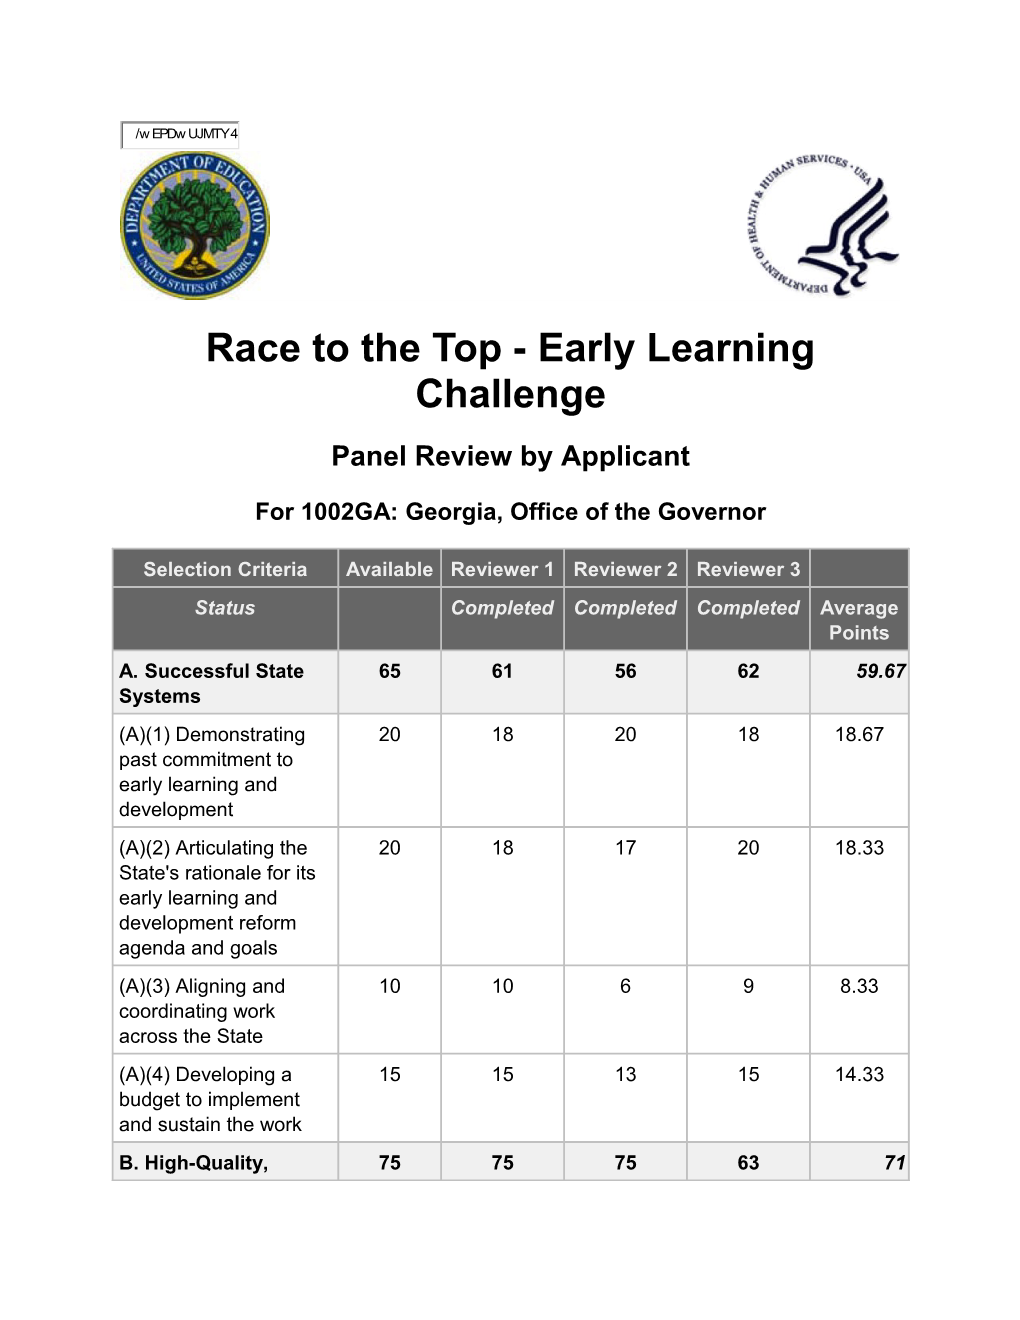 Georgia: Score Sheet for Phase 3, Race to the Top-Early Learning Challenge, Application